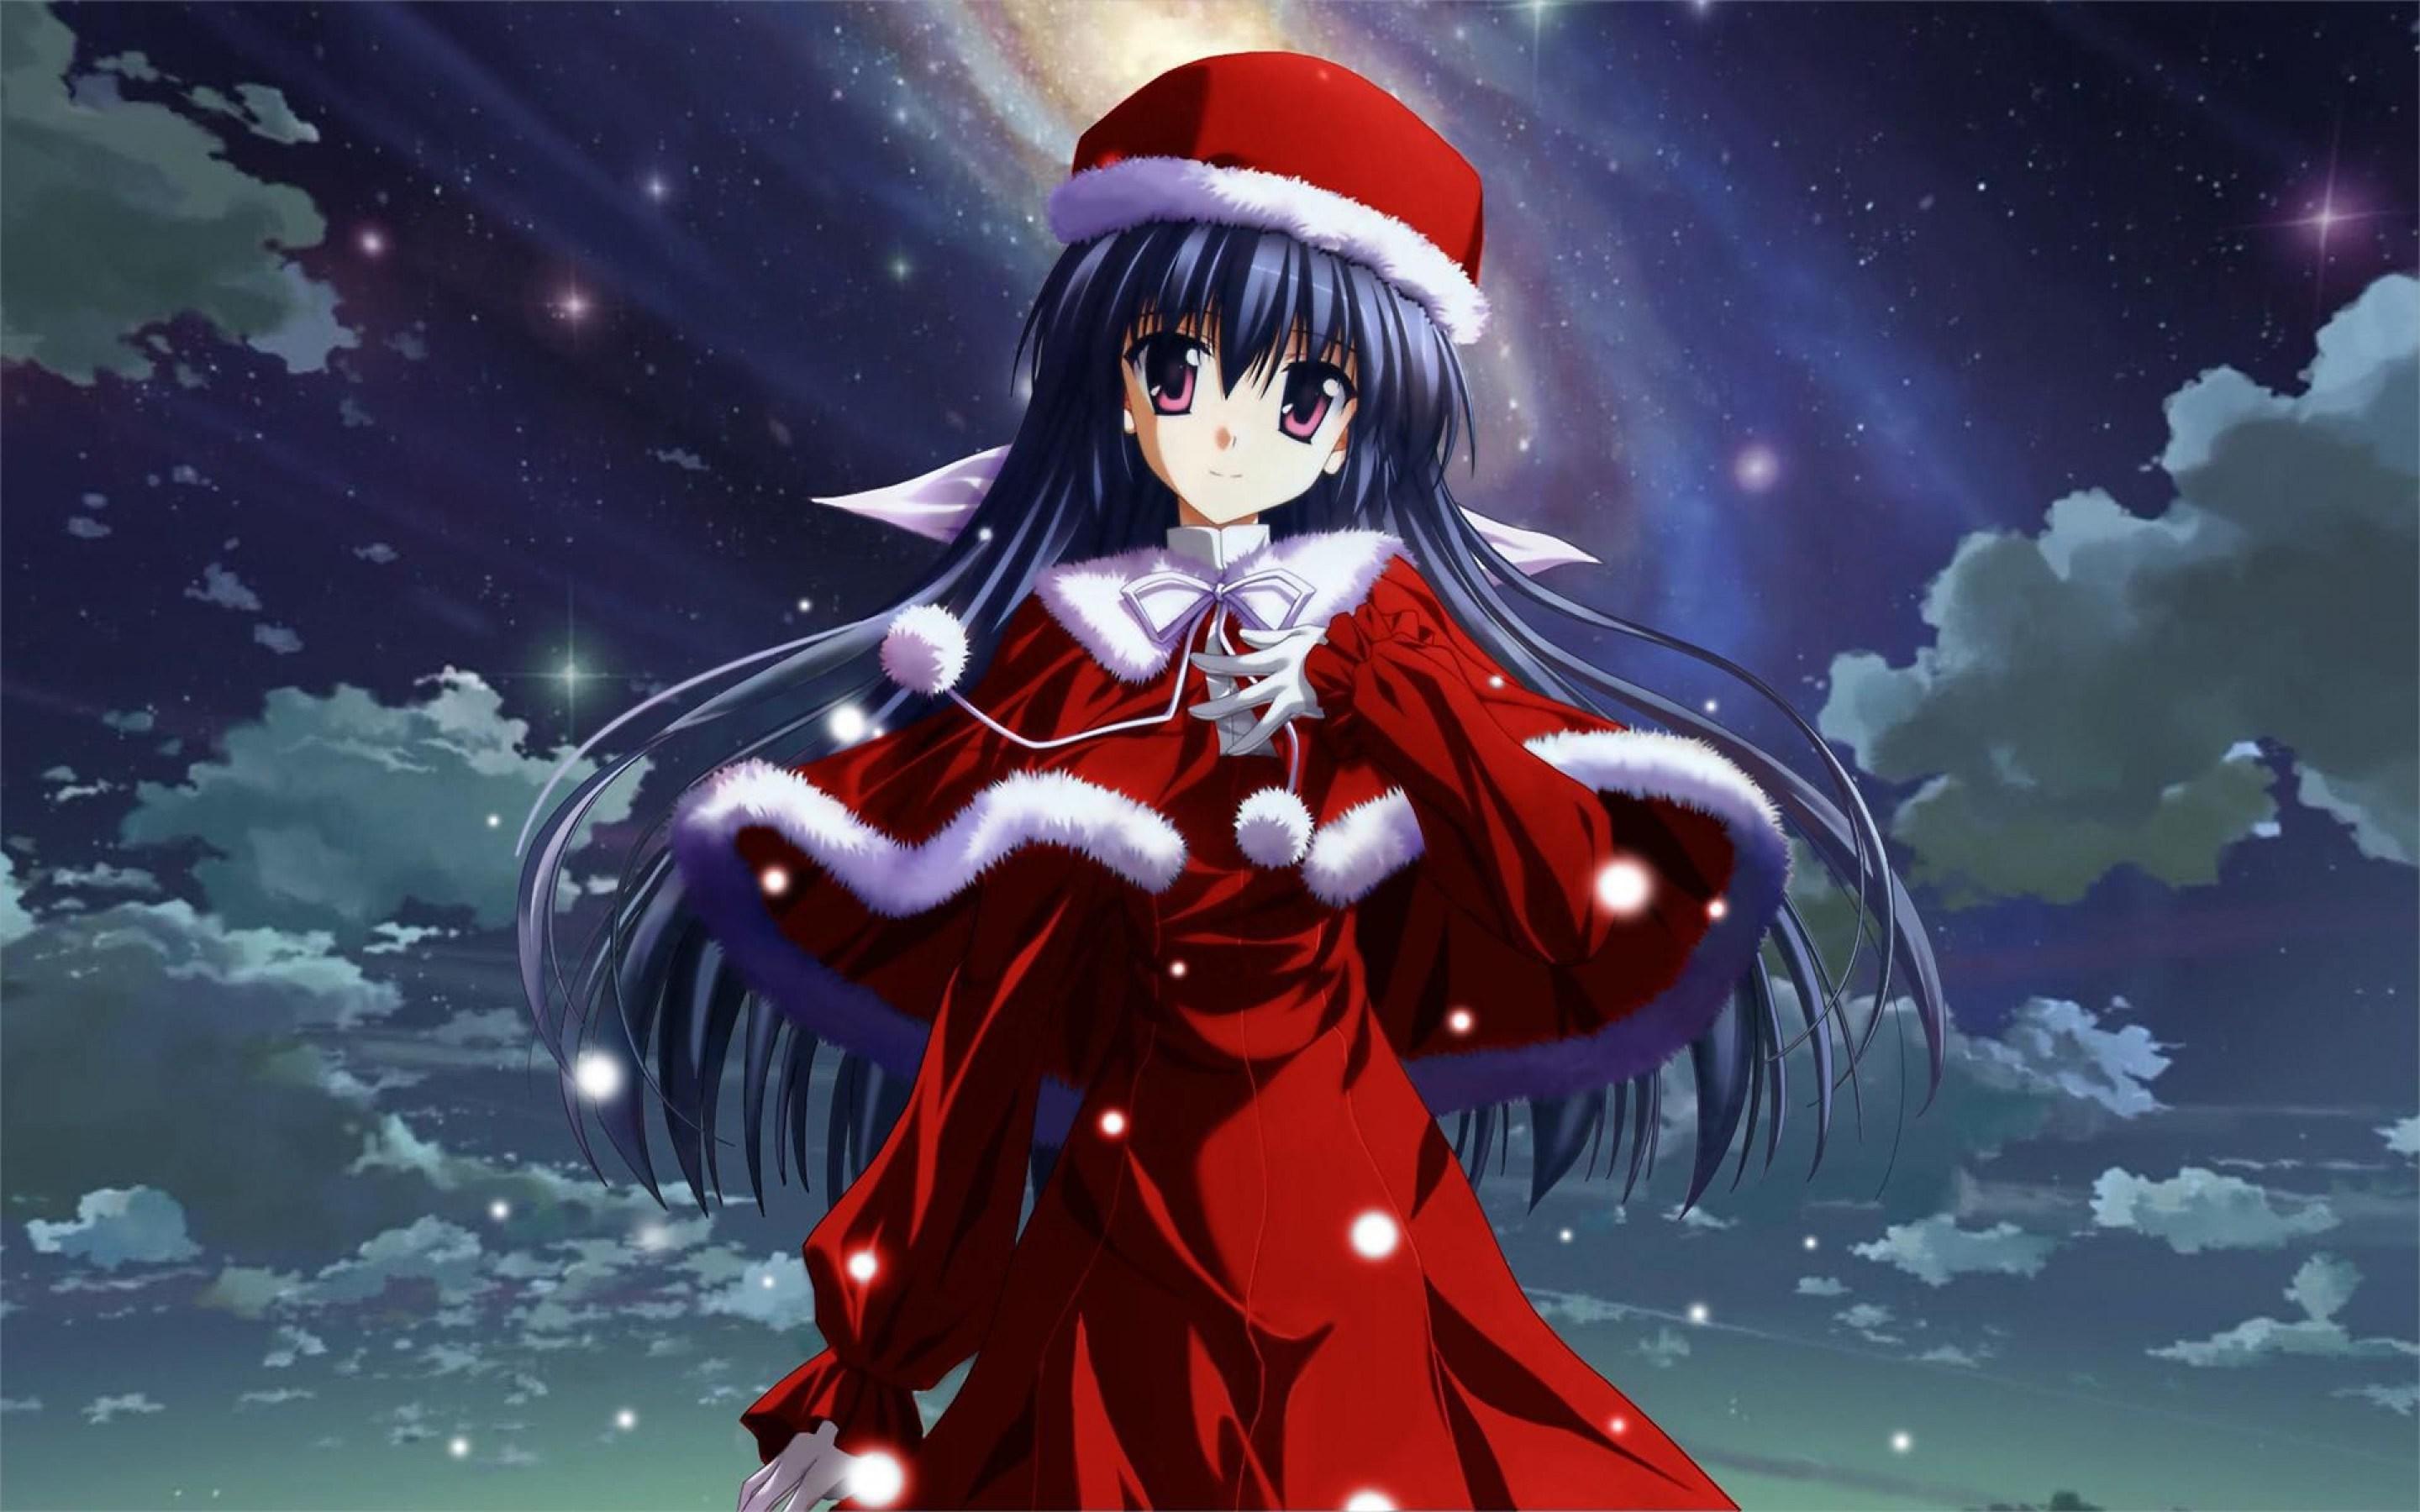 Merry Christmas Cute Anime Image Red Cute Anime Girl Wallpaper & Background Download